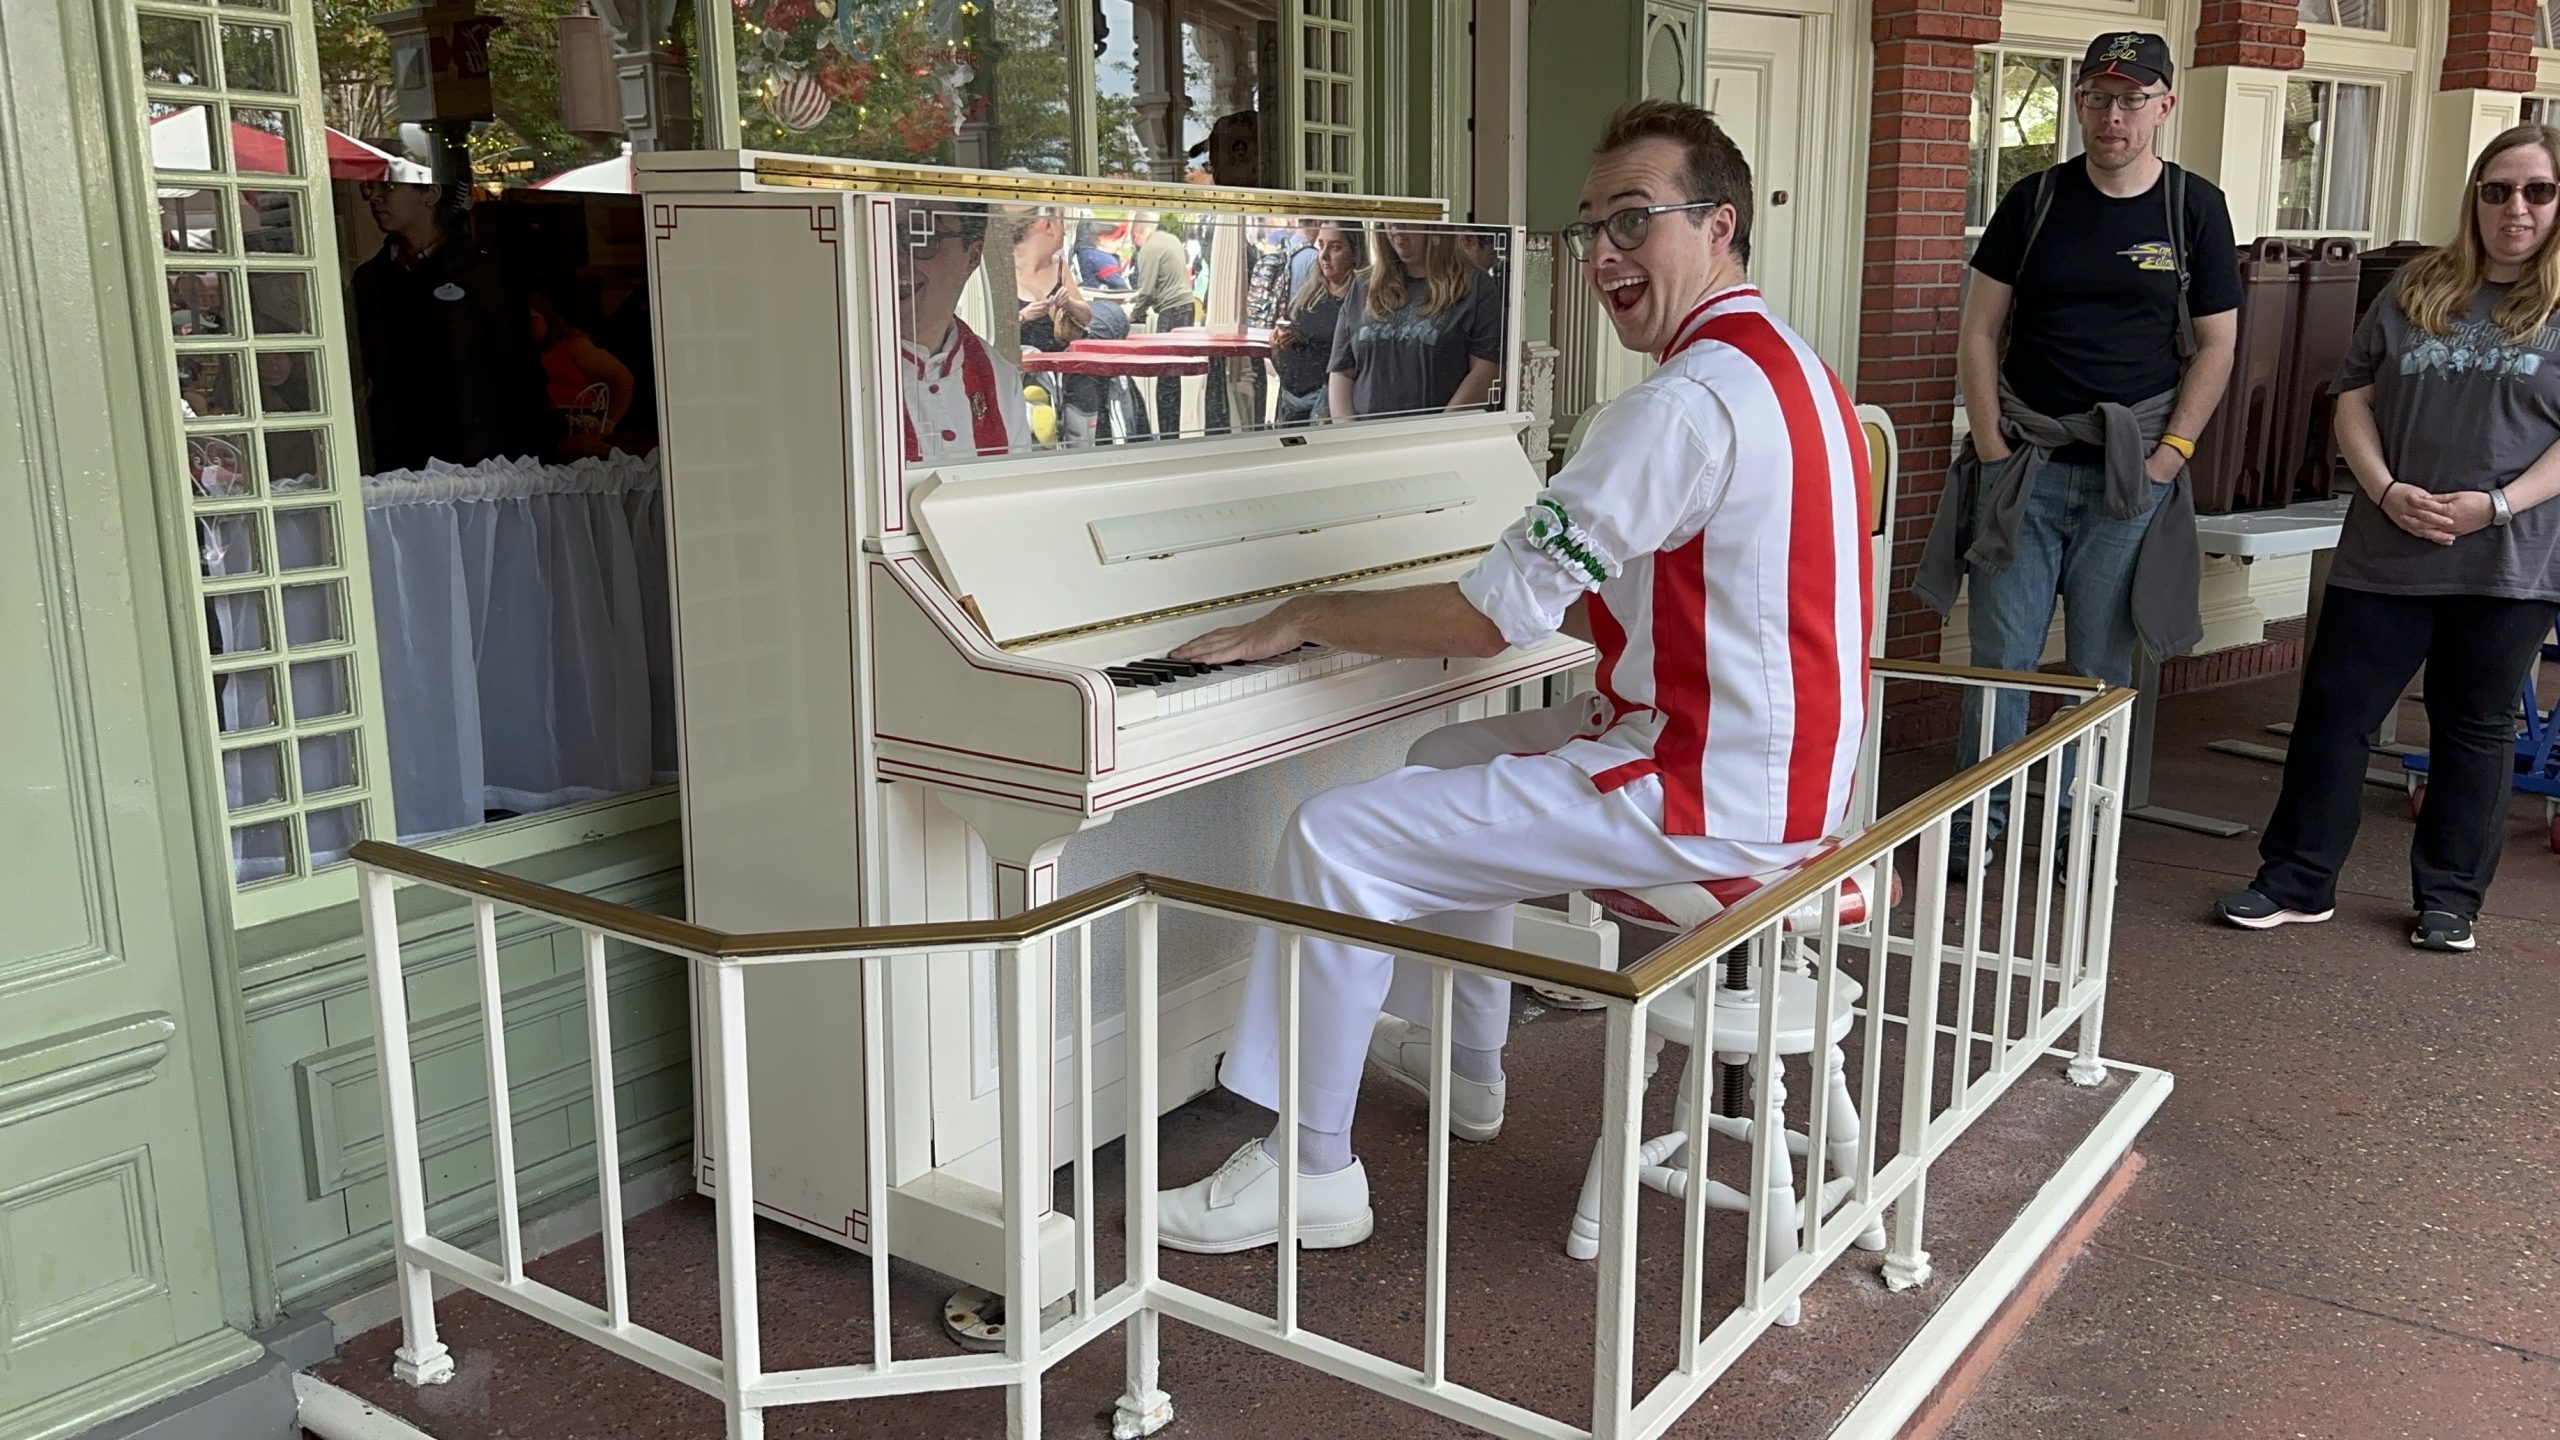 Listen to a ‘White Christmas’ Medley Played by Grayson on the Ragtime Piano at Magic Kingdom